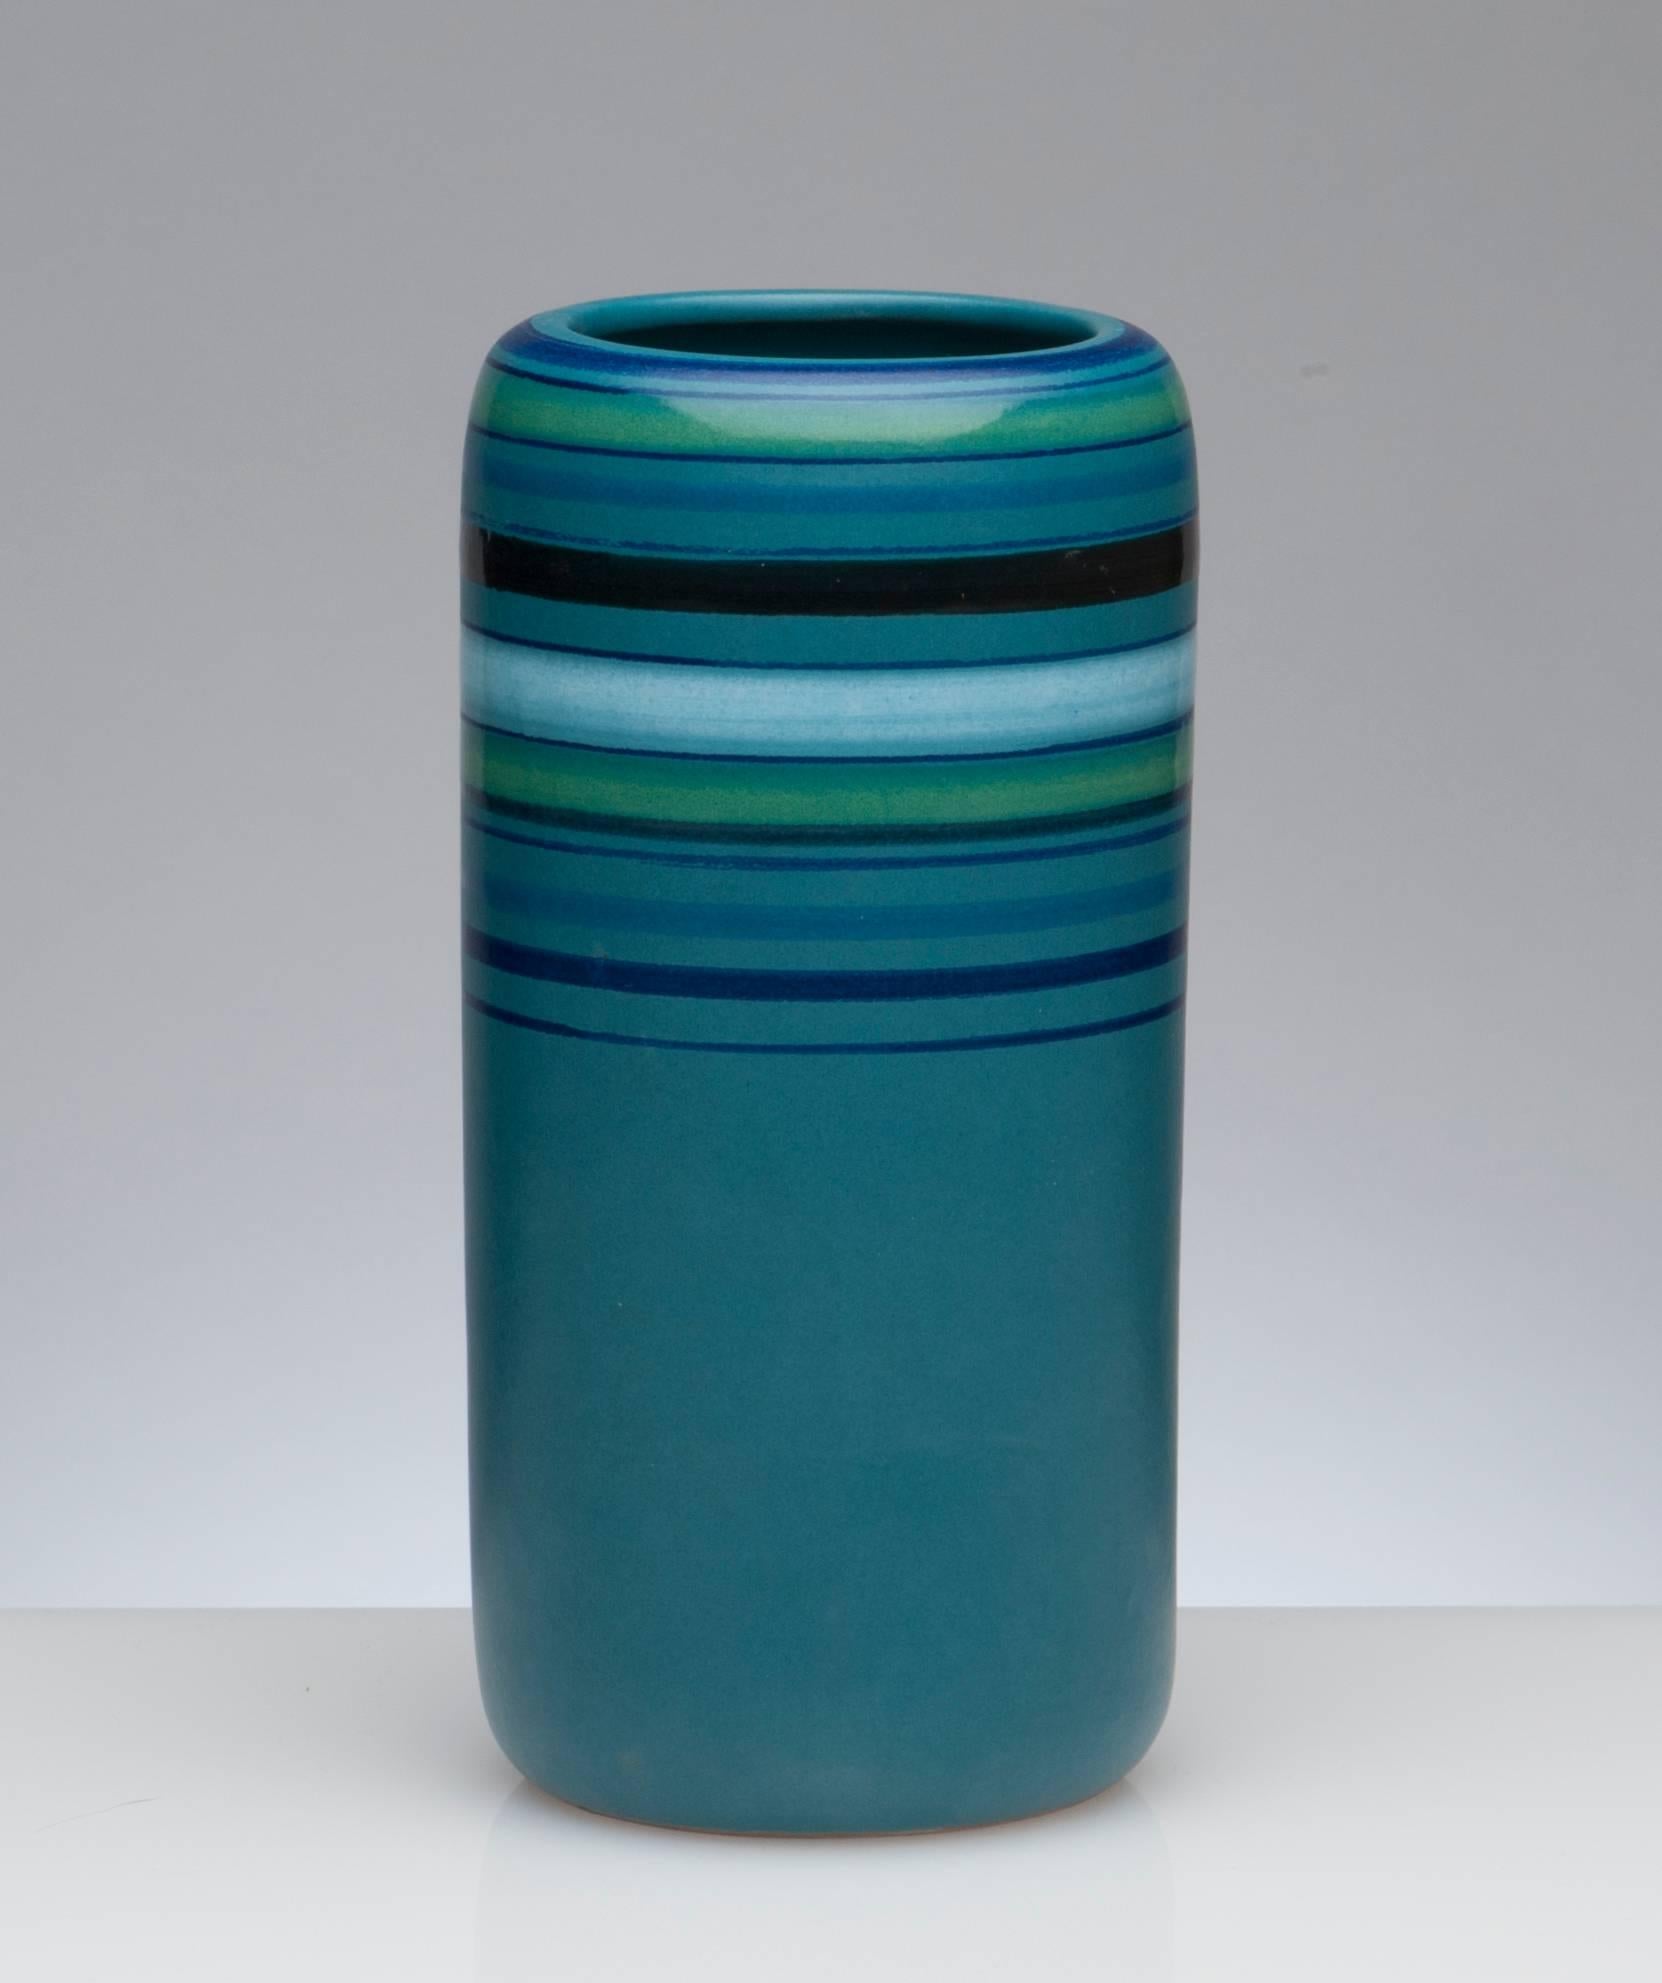 Bitossi for Rosenthal Netter blue striped vase. This line for Bitossi is known as the 